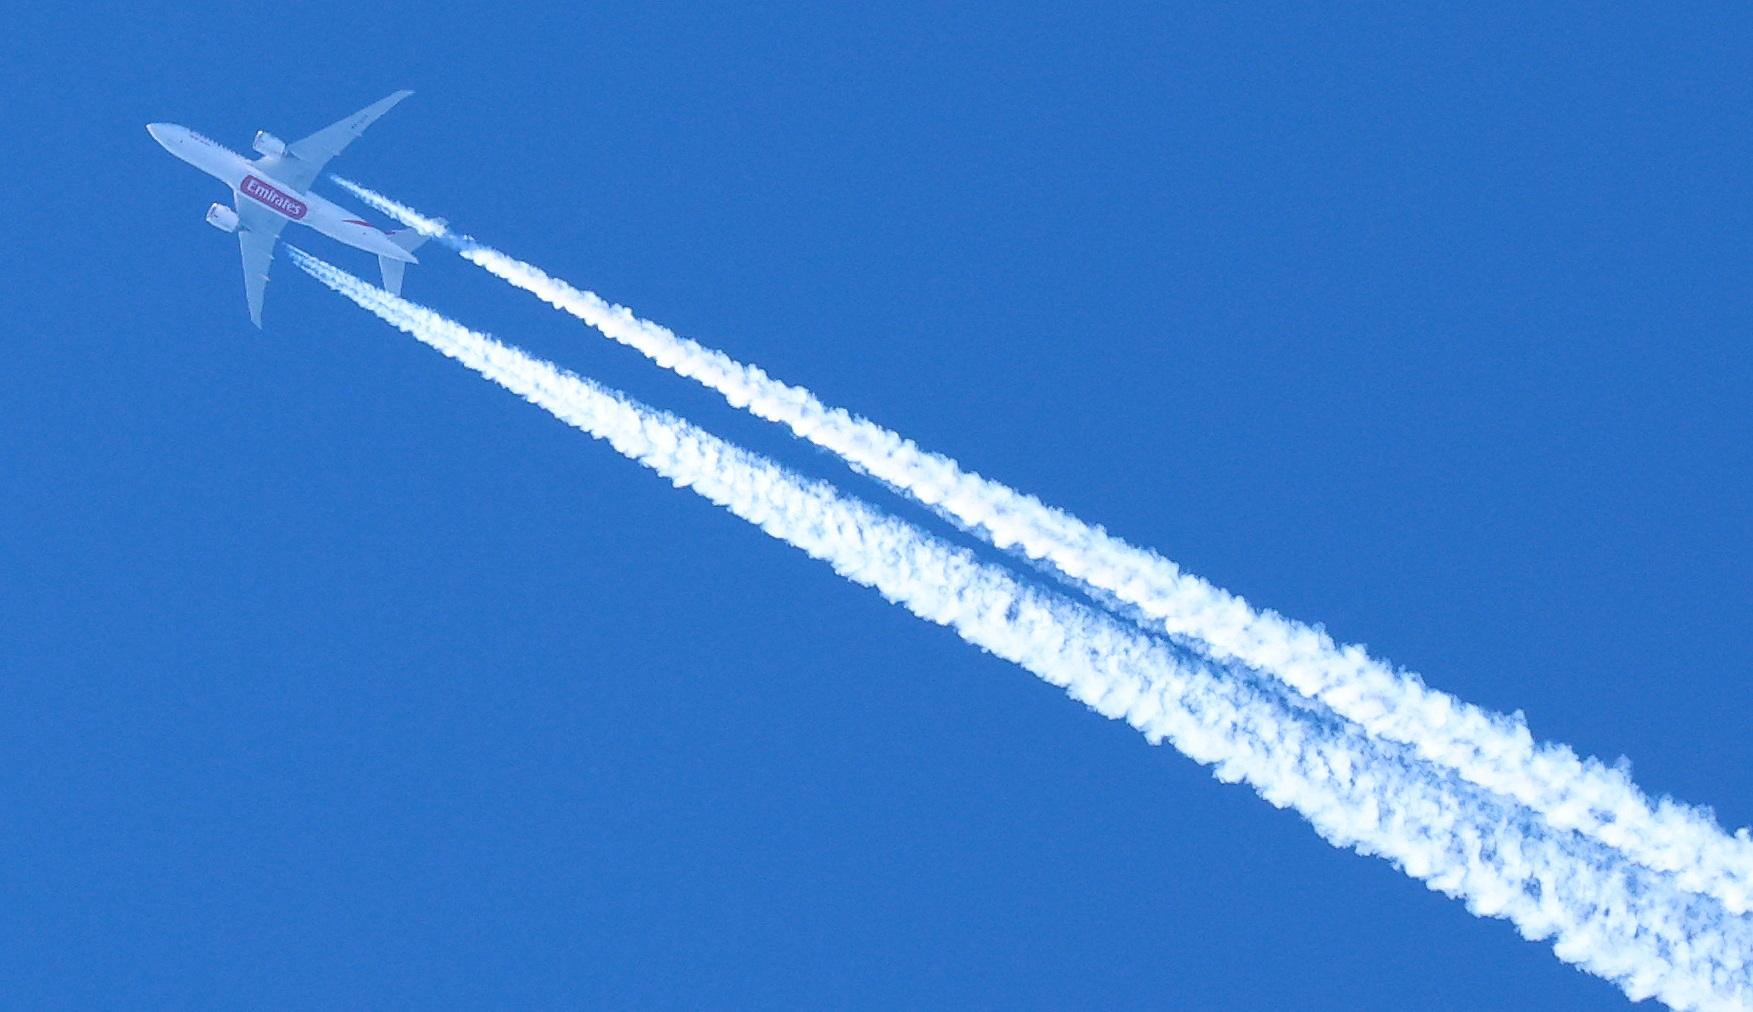 Vapour trails are seen behind an Emirates airline passenger plane as it flies over Manchester. 